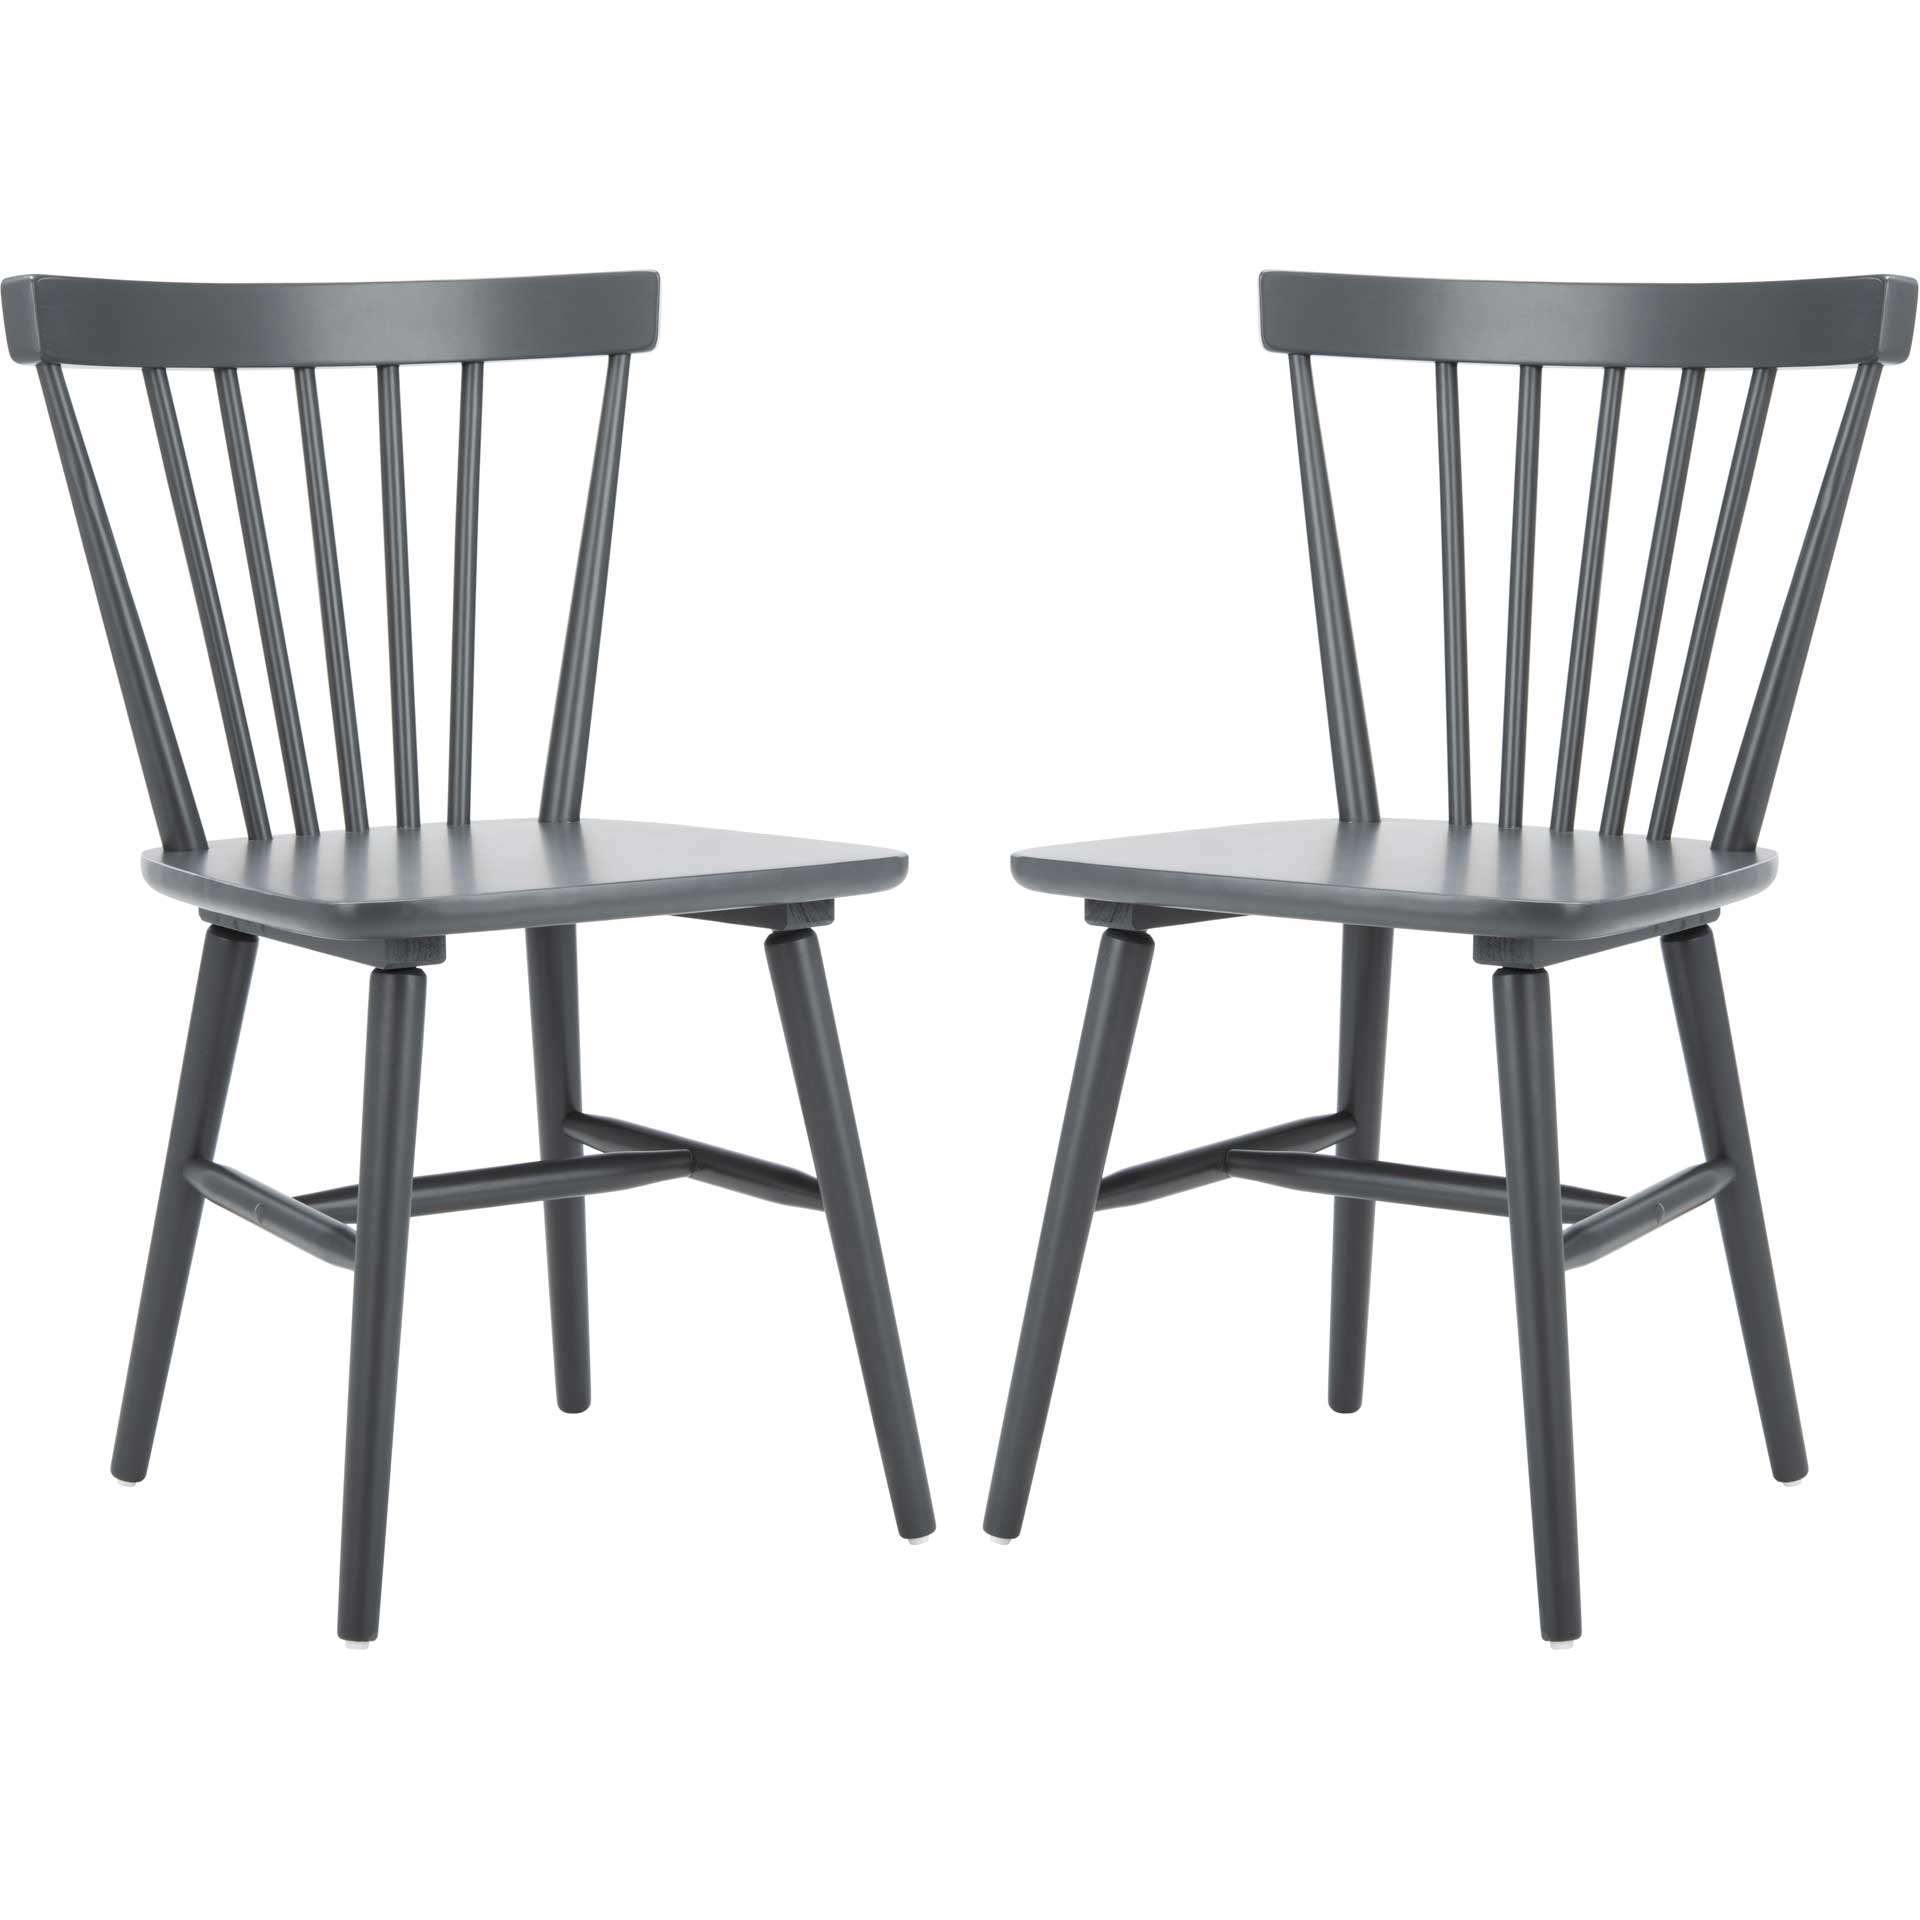 Wilder Spindle Back Dining Chair Gray (Set of 2)